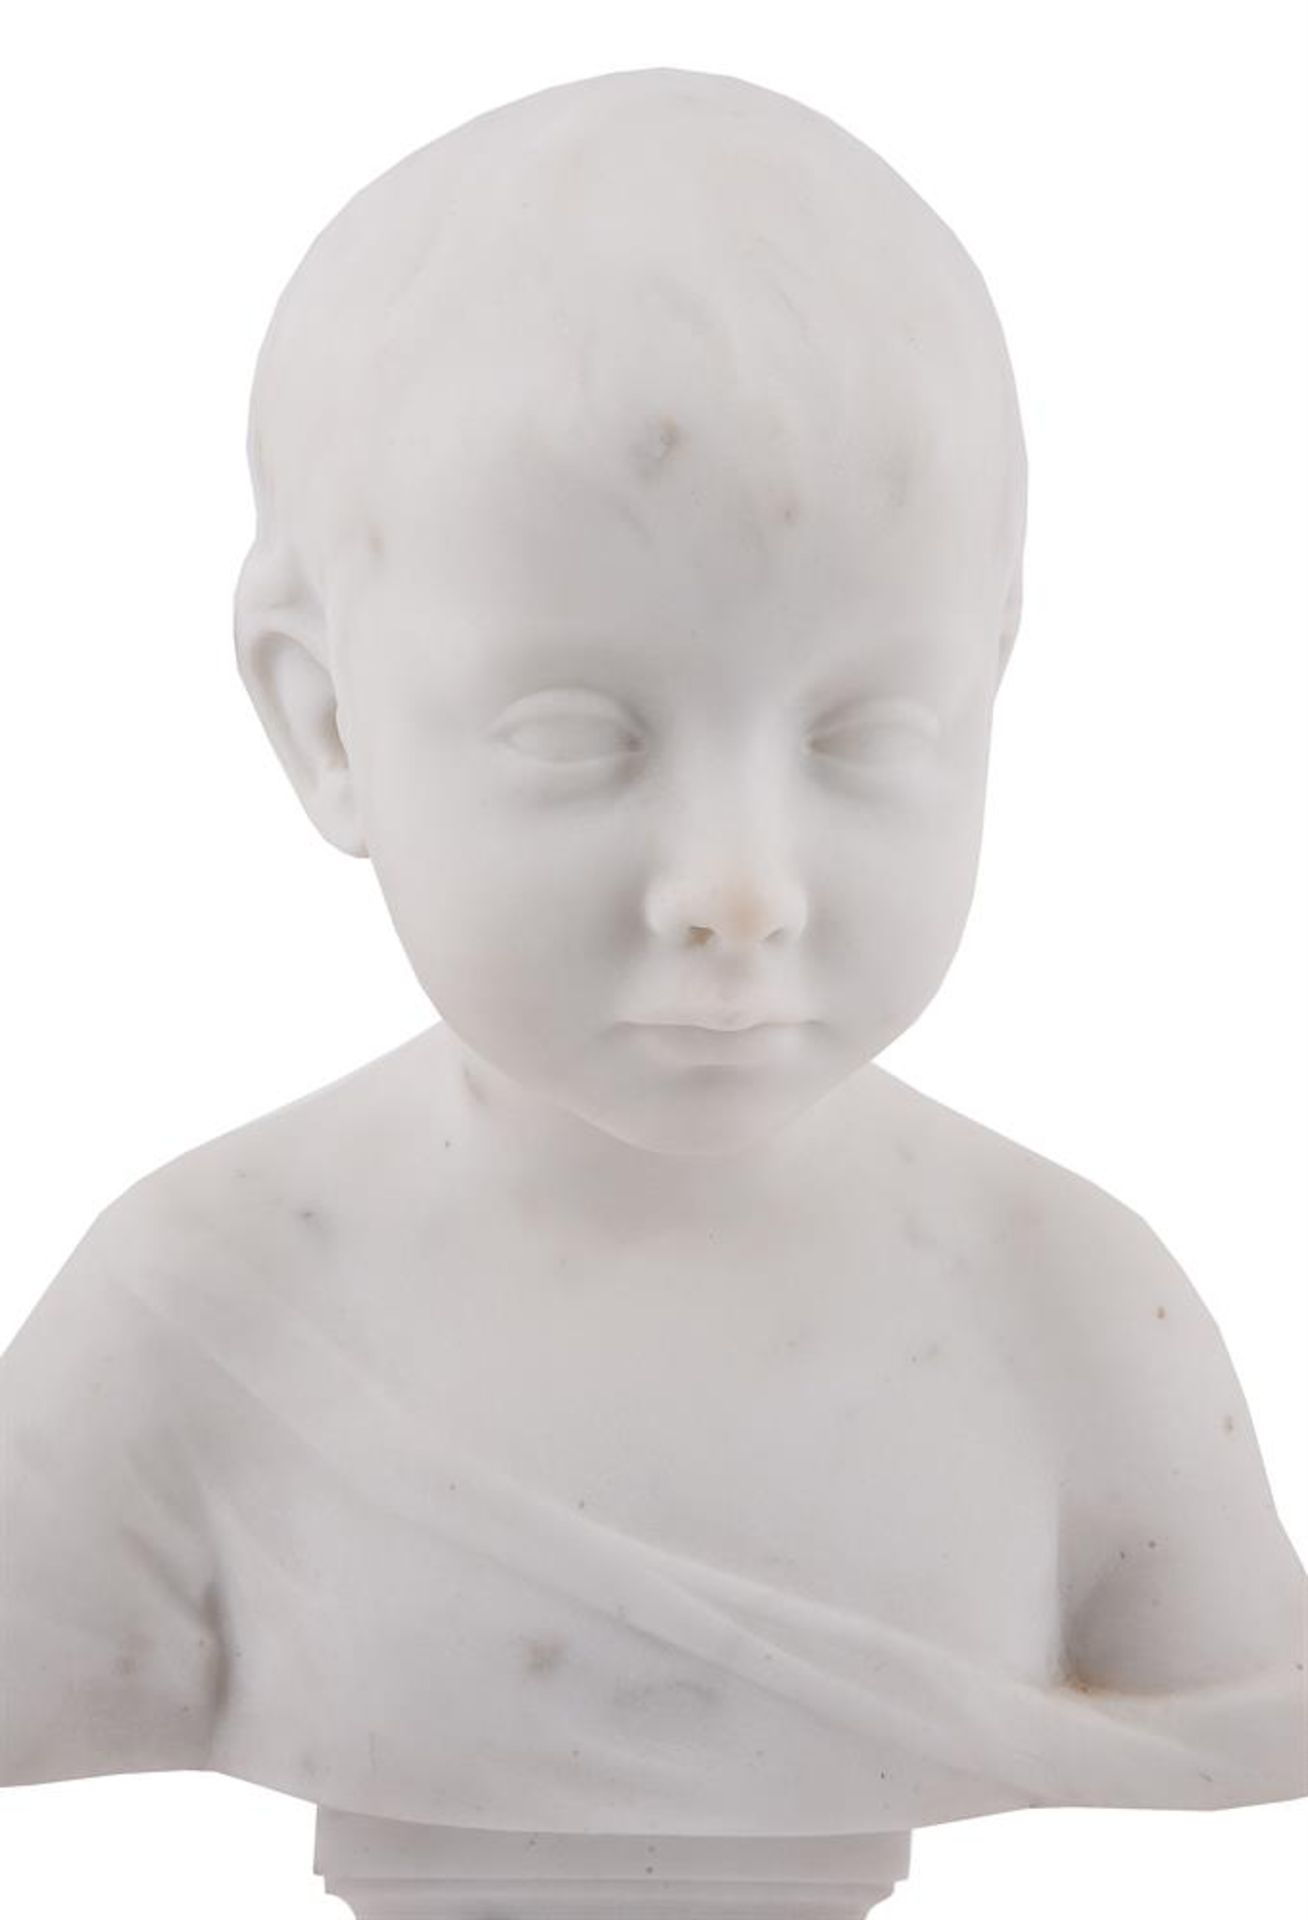 AN ITALIAN MARBLE BUST OF A YOUNG CHILD - Image 2 of 4